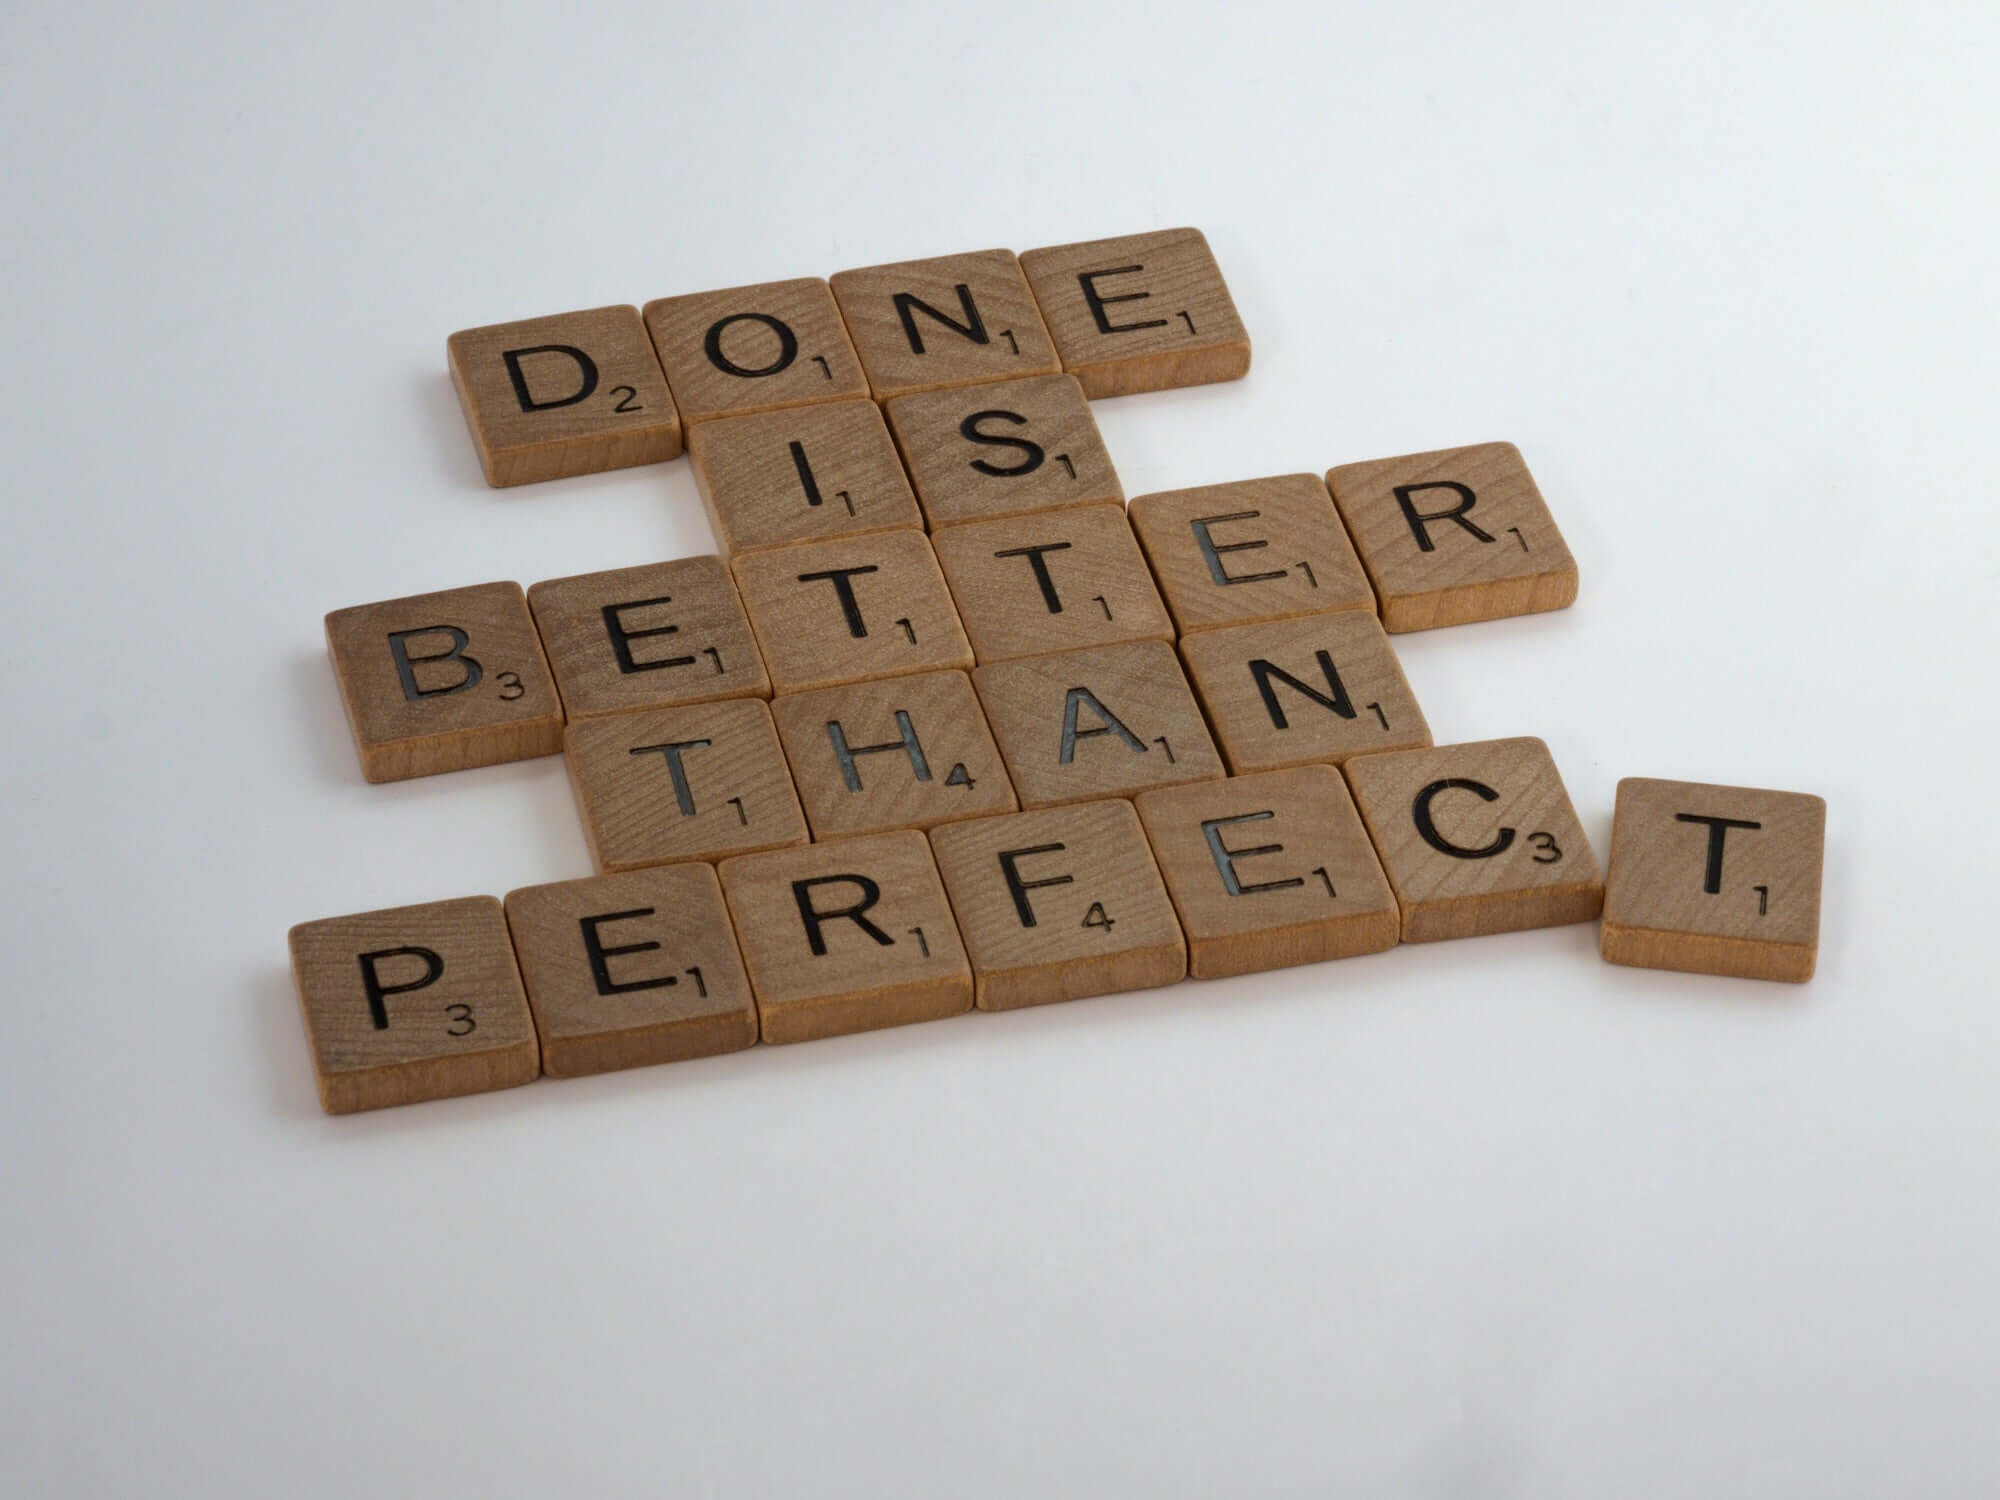 The Pitfalls of Perfectionism 